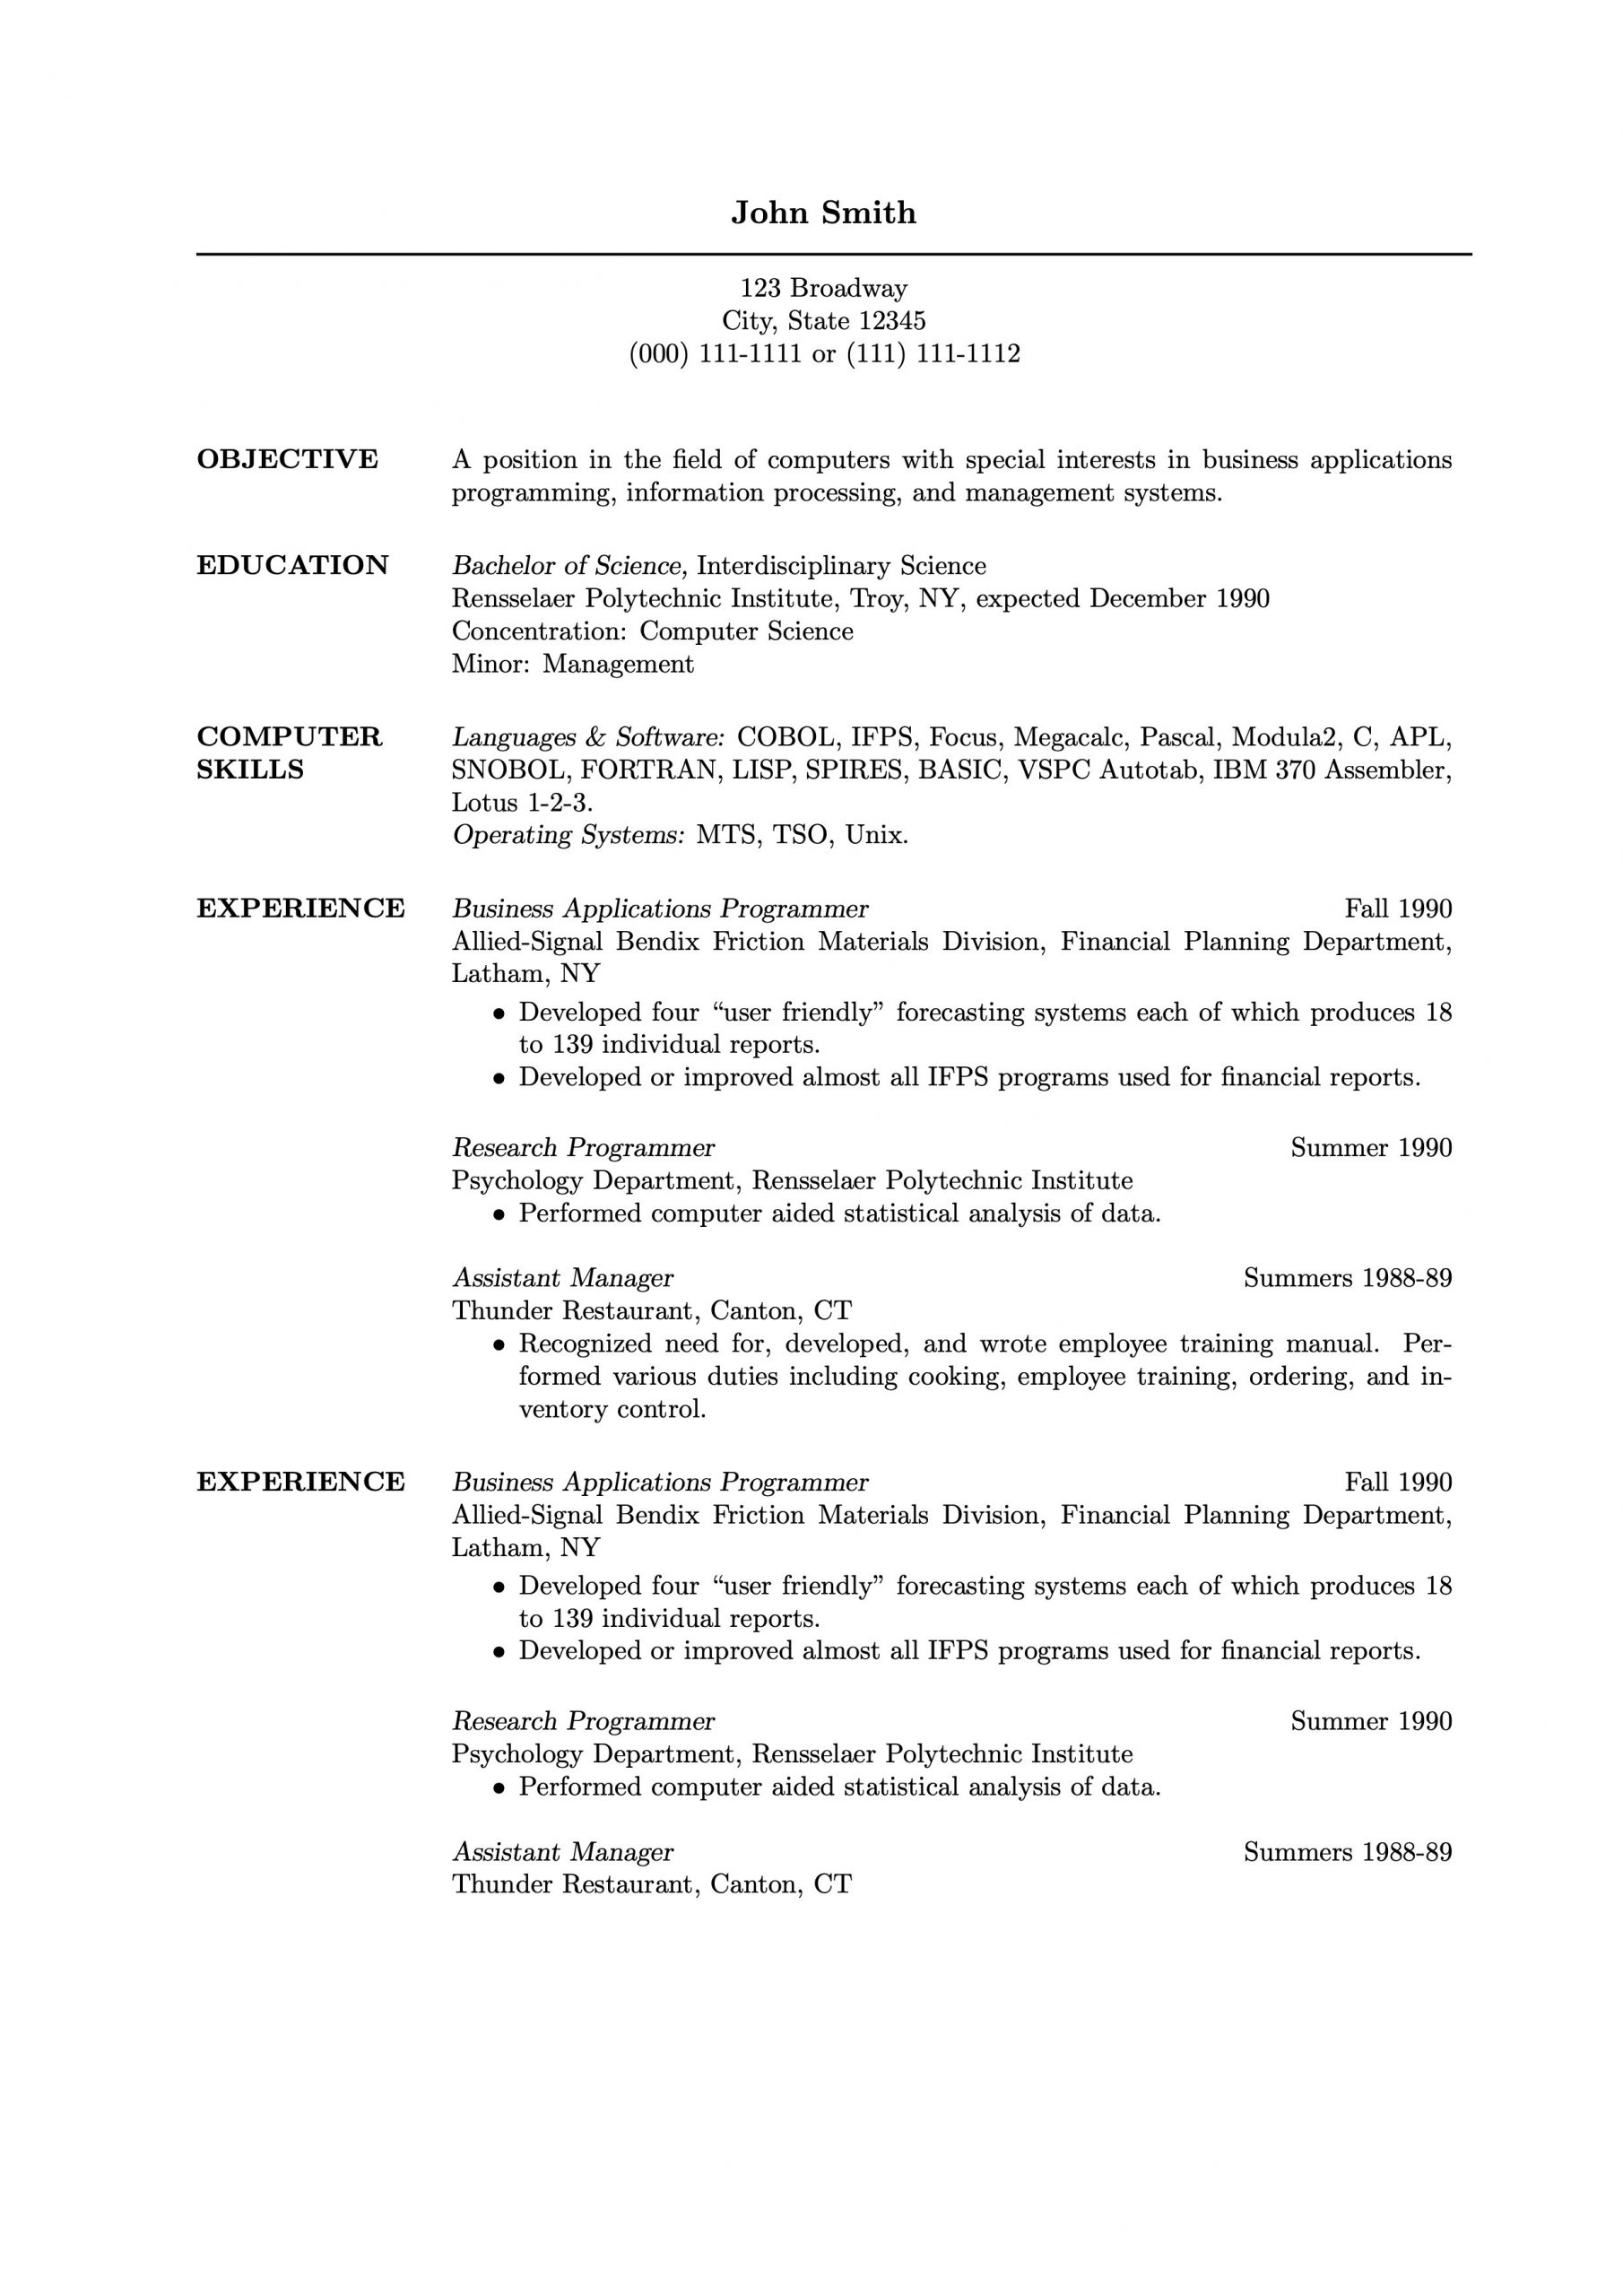 Best Resume Template for Graduate School Latex Templates – Cvs and Resumes